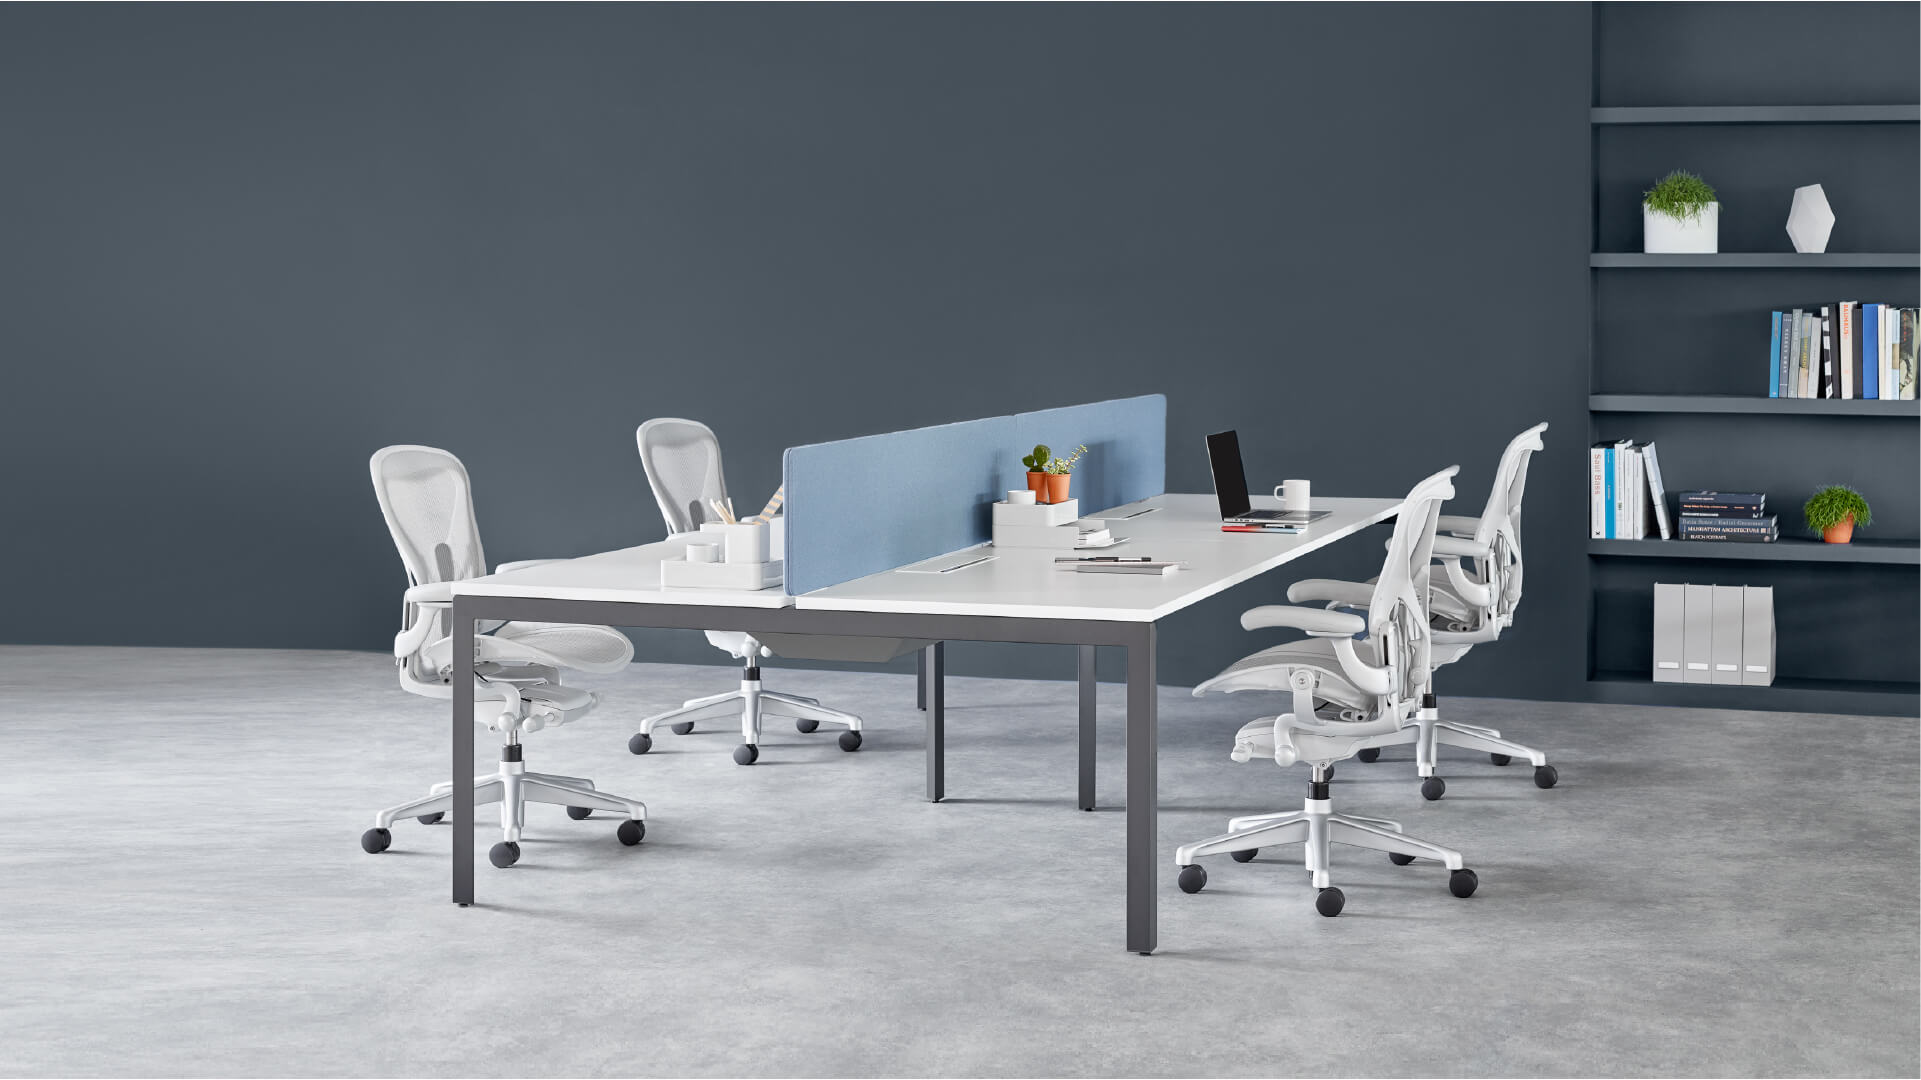 Herman Miller Insight Group - working space